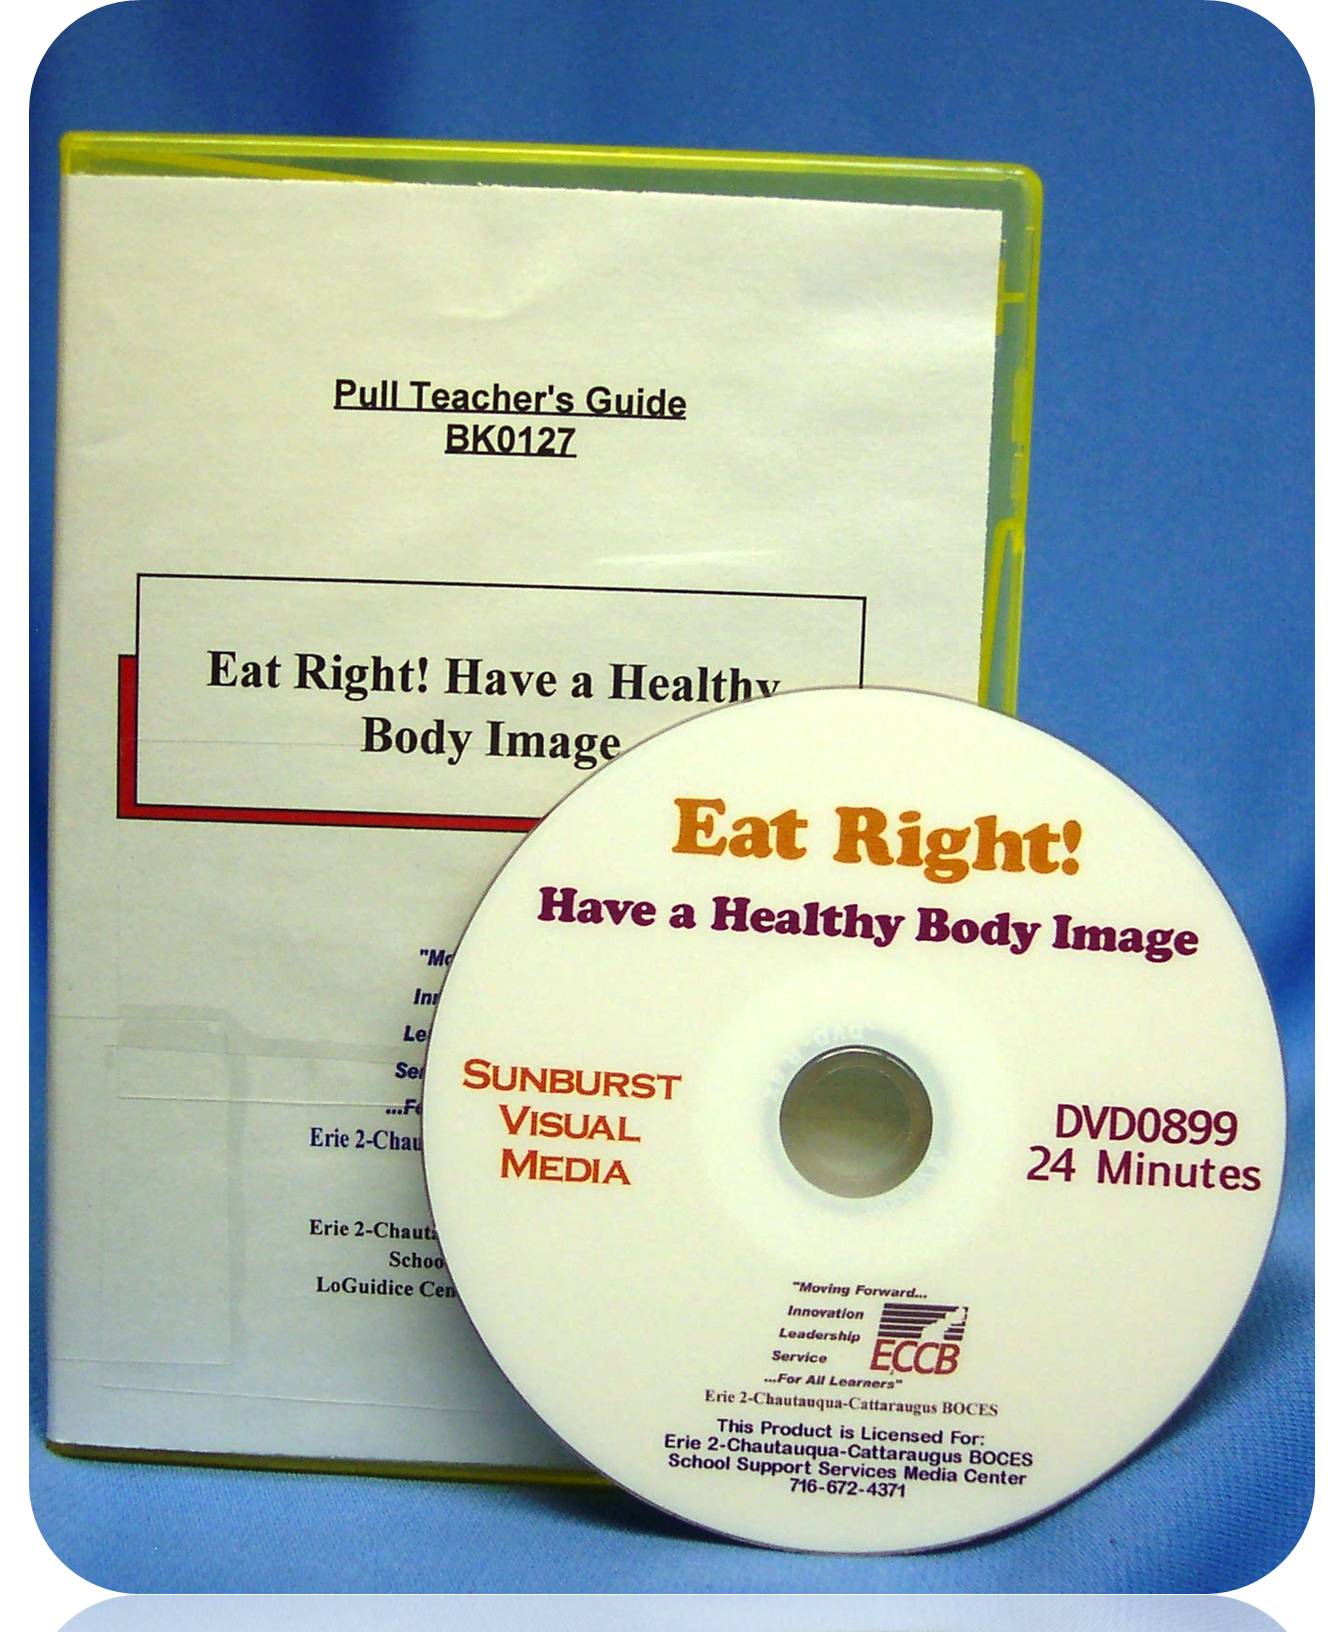 Eat Right! Have a Healthy Body Image